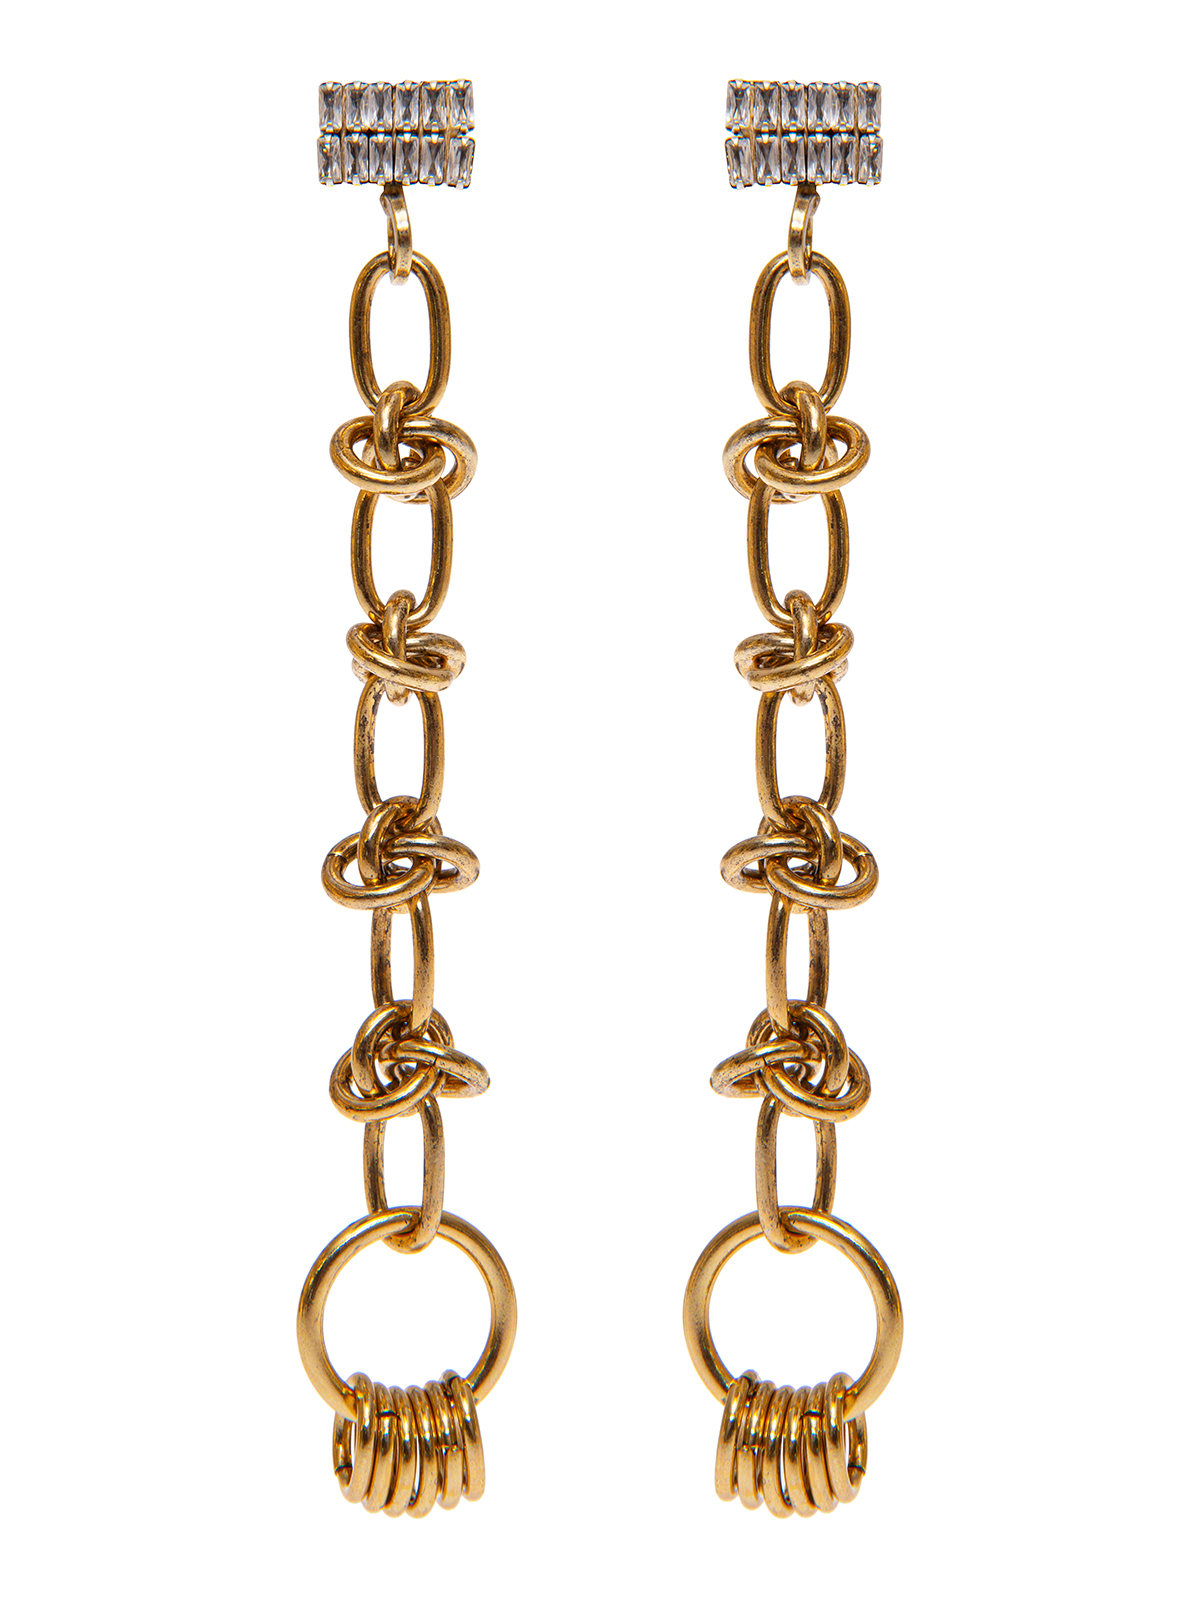 Pendent  crystal and chain earrings embellished with rings